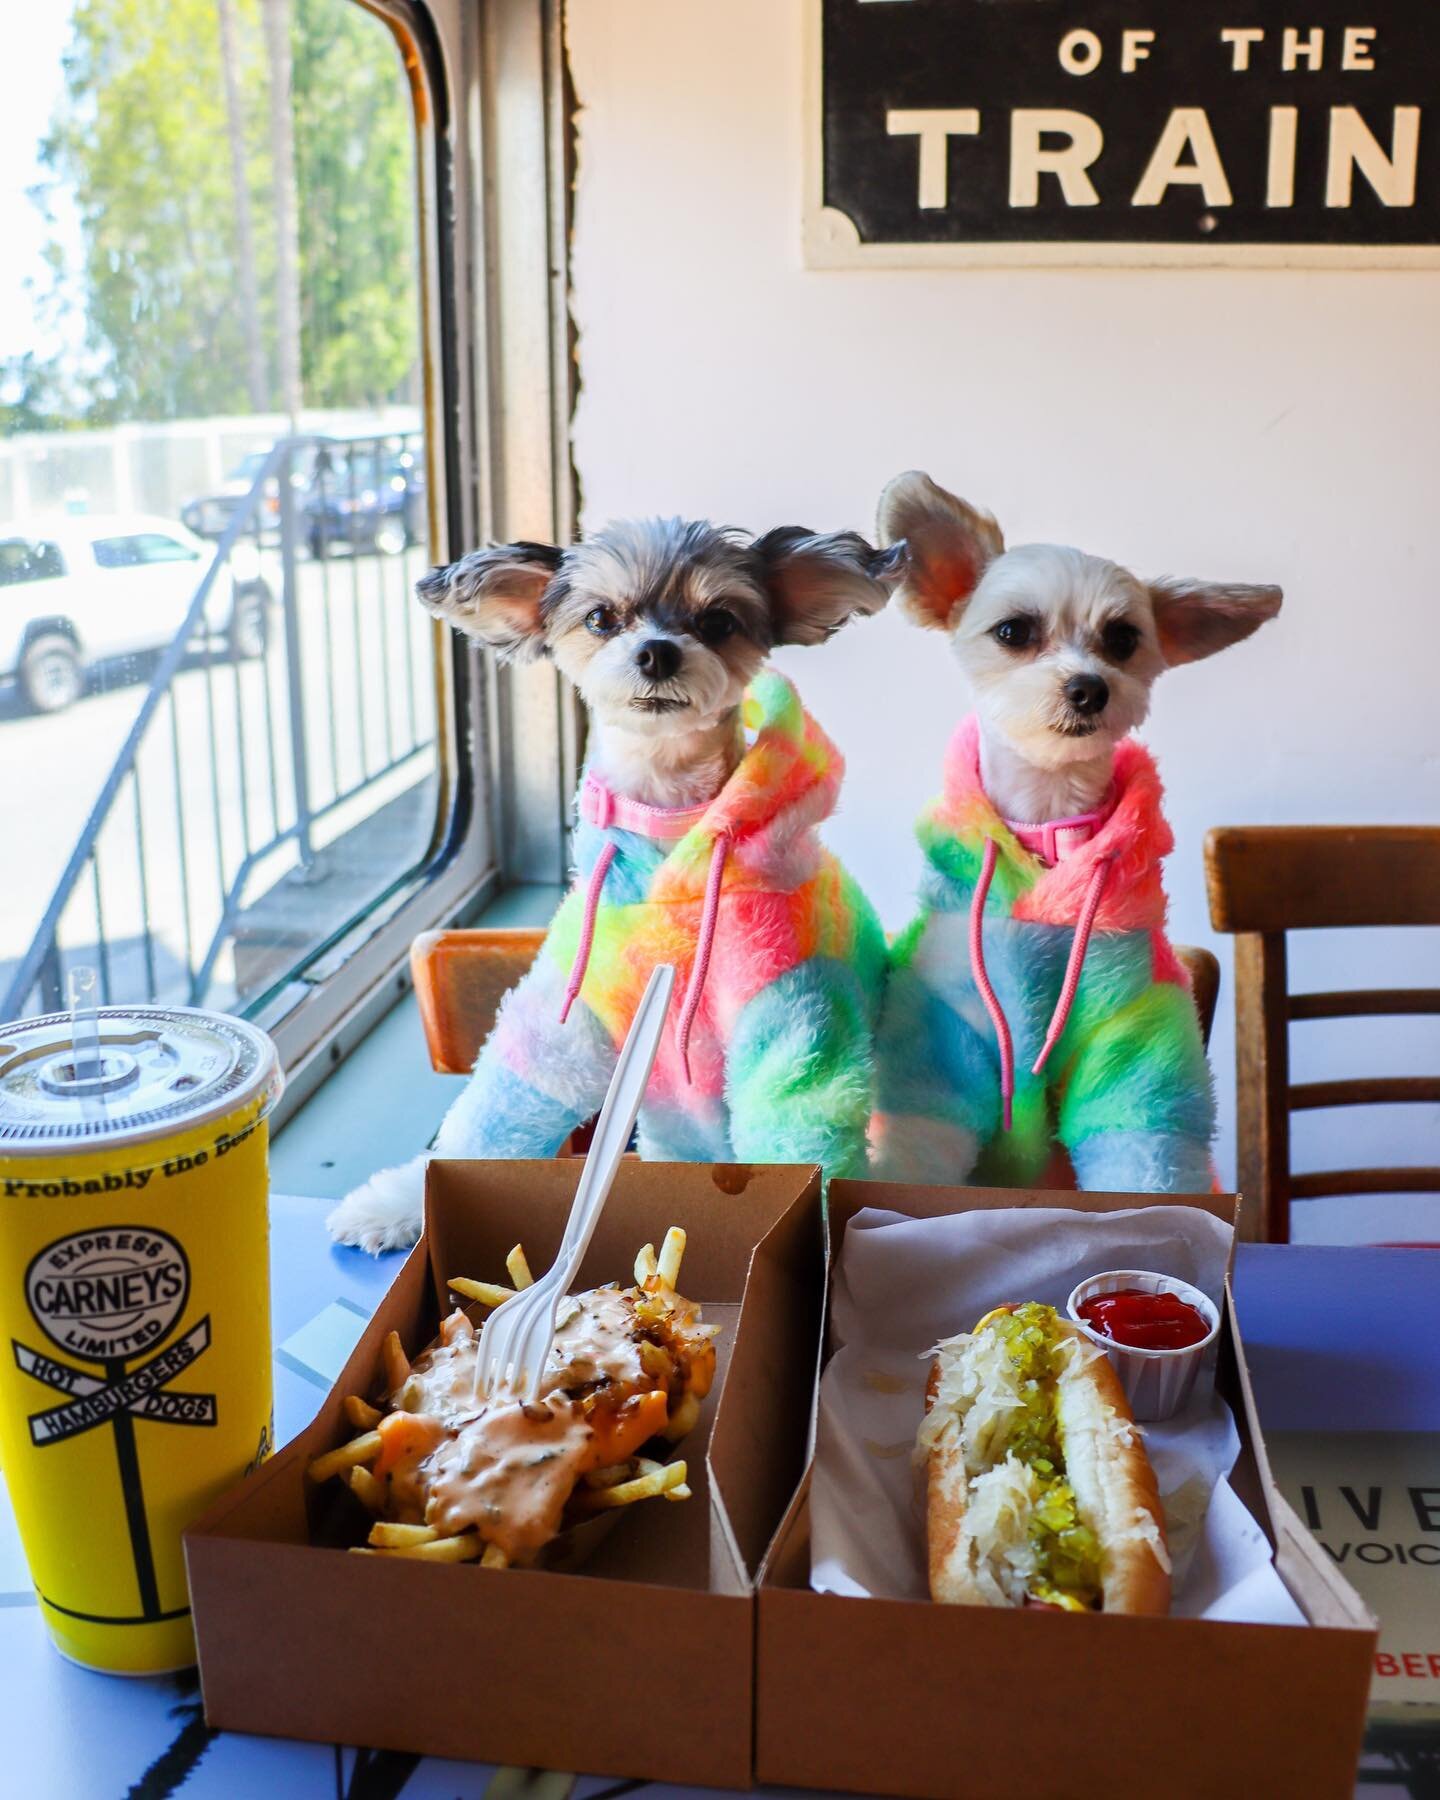 &ldquo;The best dogs in LA??? Of course we are!&rdquo; - Tinkerbelle and Belle 💕🐶✨🌭 
.
.
.
.
#carneytrain #dogsofla #losangeles #ilovela #dogsofinsta #dogsandpals #dogsofnyc #hotdogs #cutenessoverload #dogsdaily #tinkerbellethedog #carneys